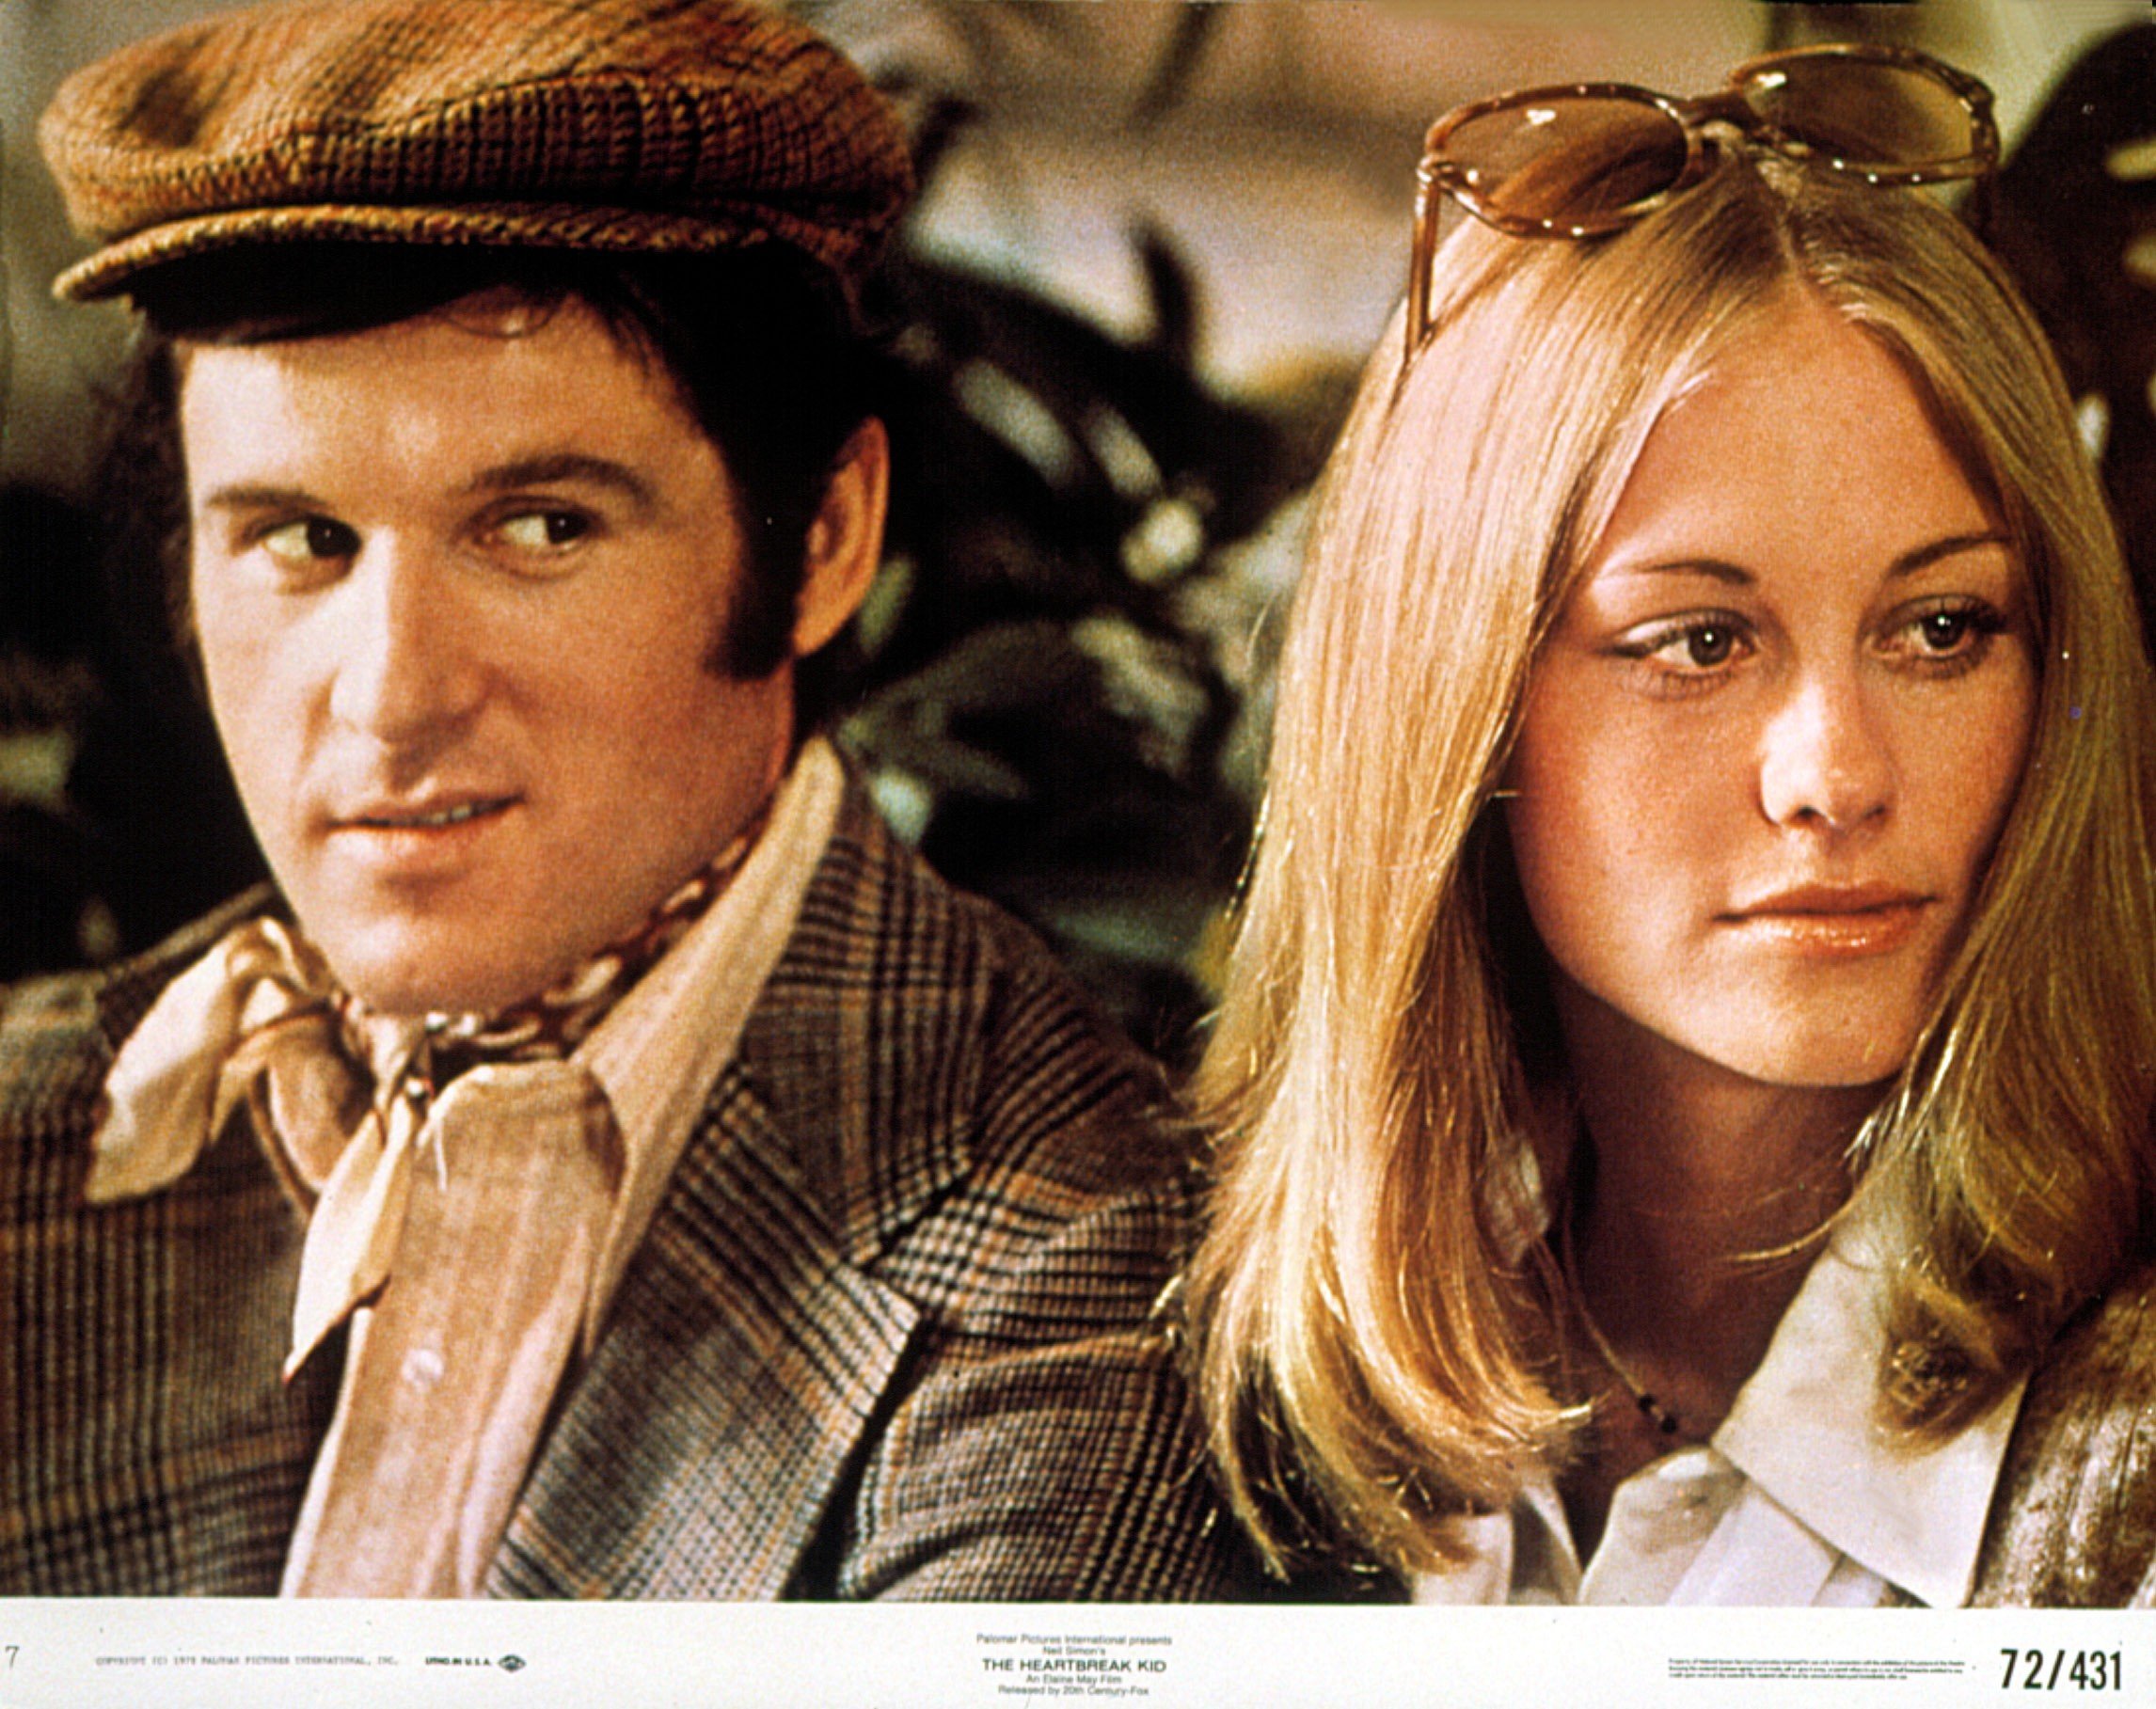 Charles Grodin as Lenny Cantrow with Cybill Shepherd as Kelly Corcoran in the 1972 film, "The Heartbreak Kid." | Photo: Getty Images